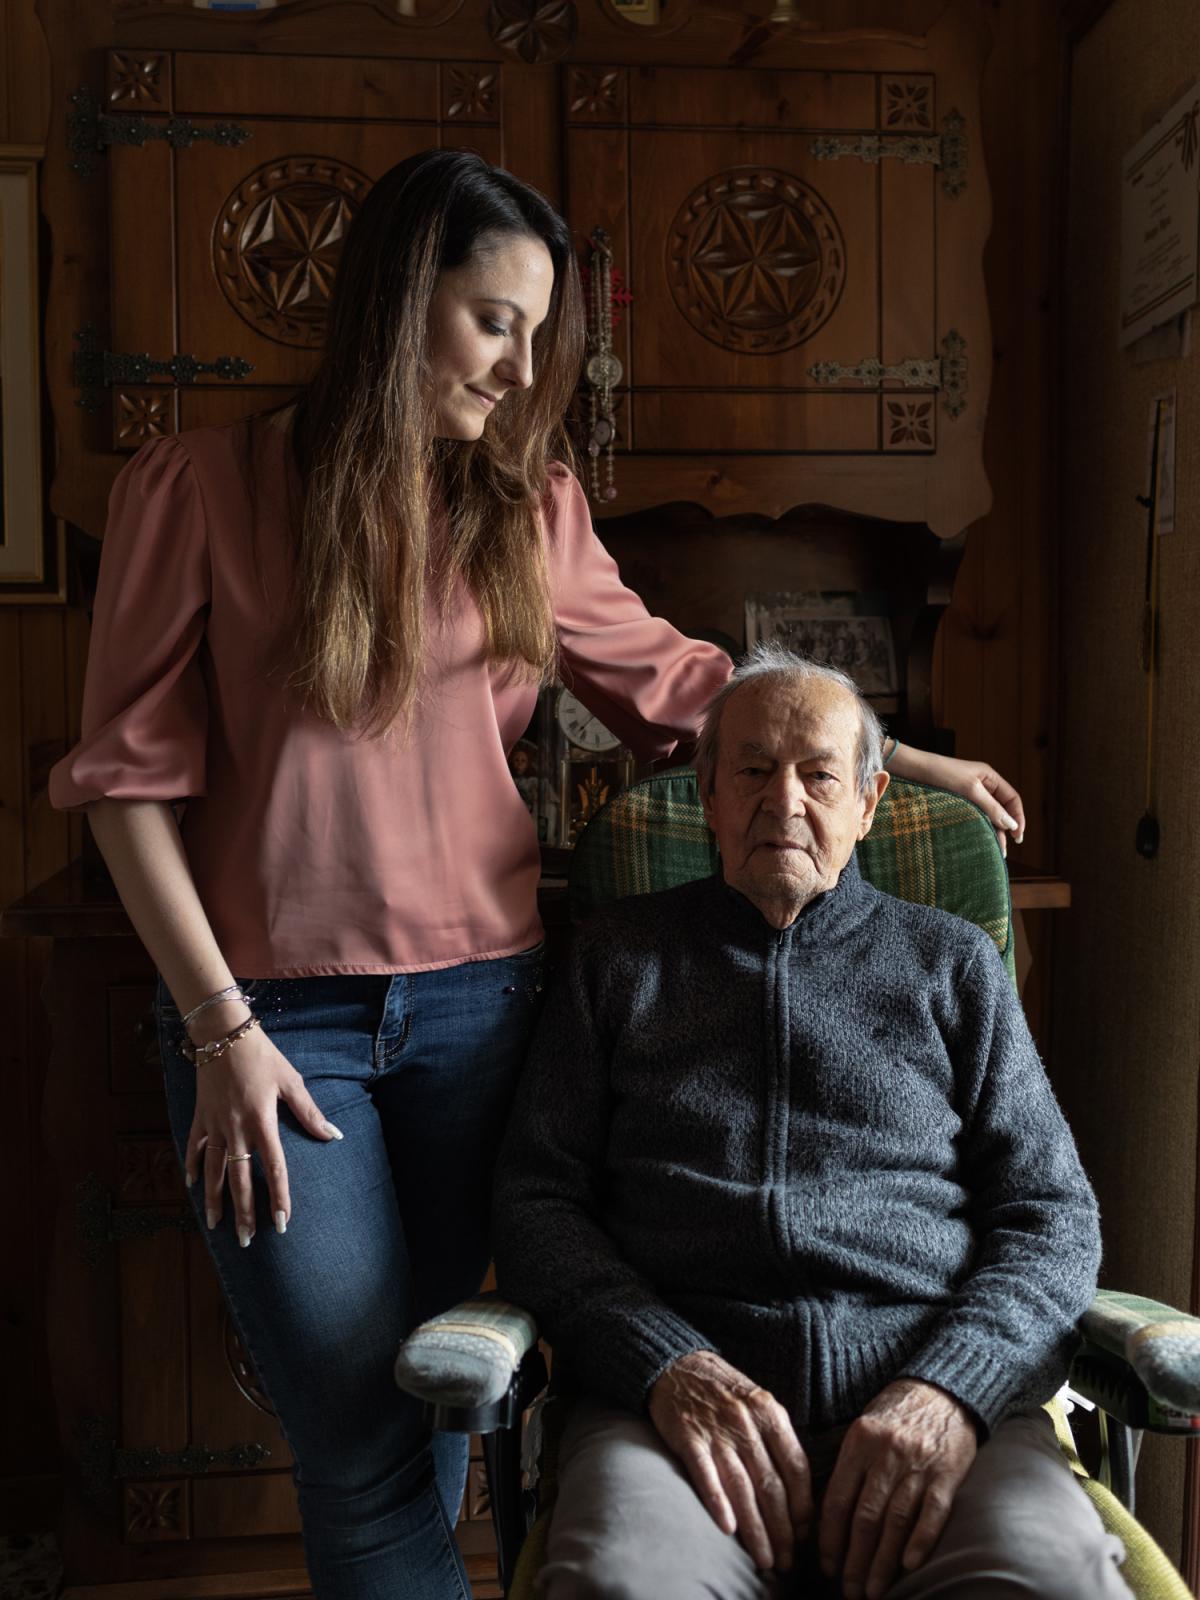 We are still dreaming - on going - Giorgio, born in 1927, with his 29-year-old niece Maria...